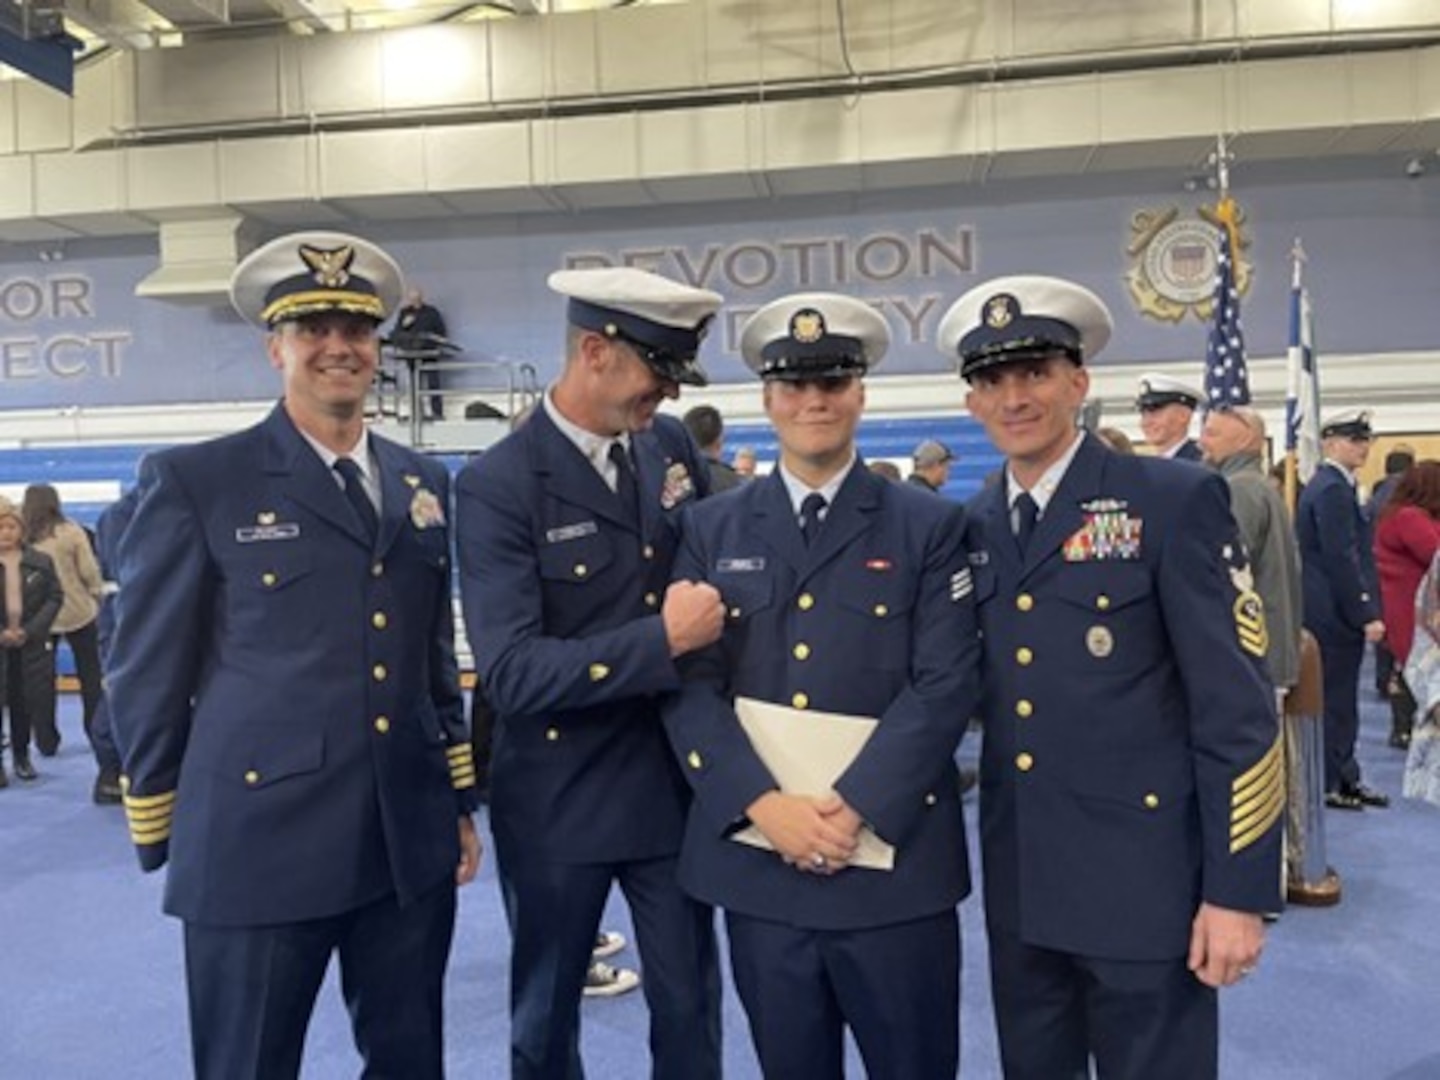 Cutline: Seaman Jackson Midgett (second from right), celebrates his boot camp graduation with Master Chief Petty Officer Aaron Turbett (second from left) Nov. 18, 2022. in Cape May, New Jersey. As a recruiting liaison Turbett found a way to help Midgett realize his dream of joining the Coast Guard.